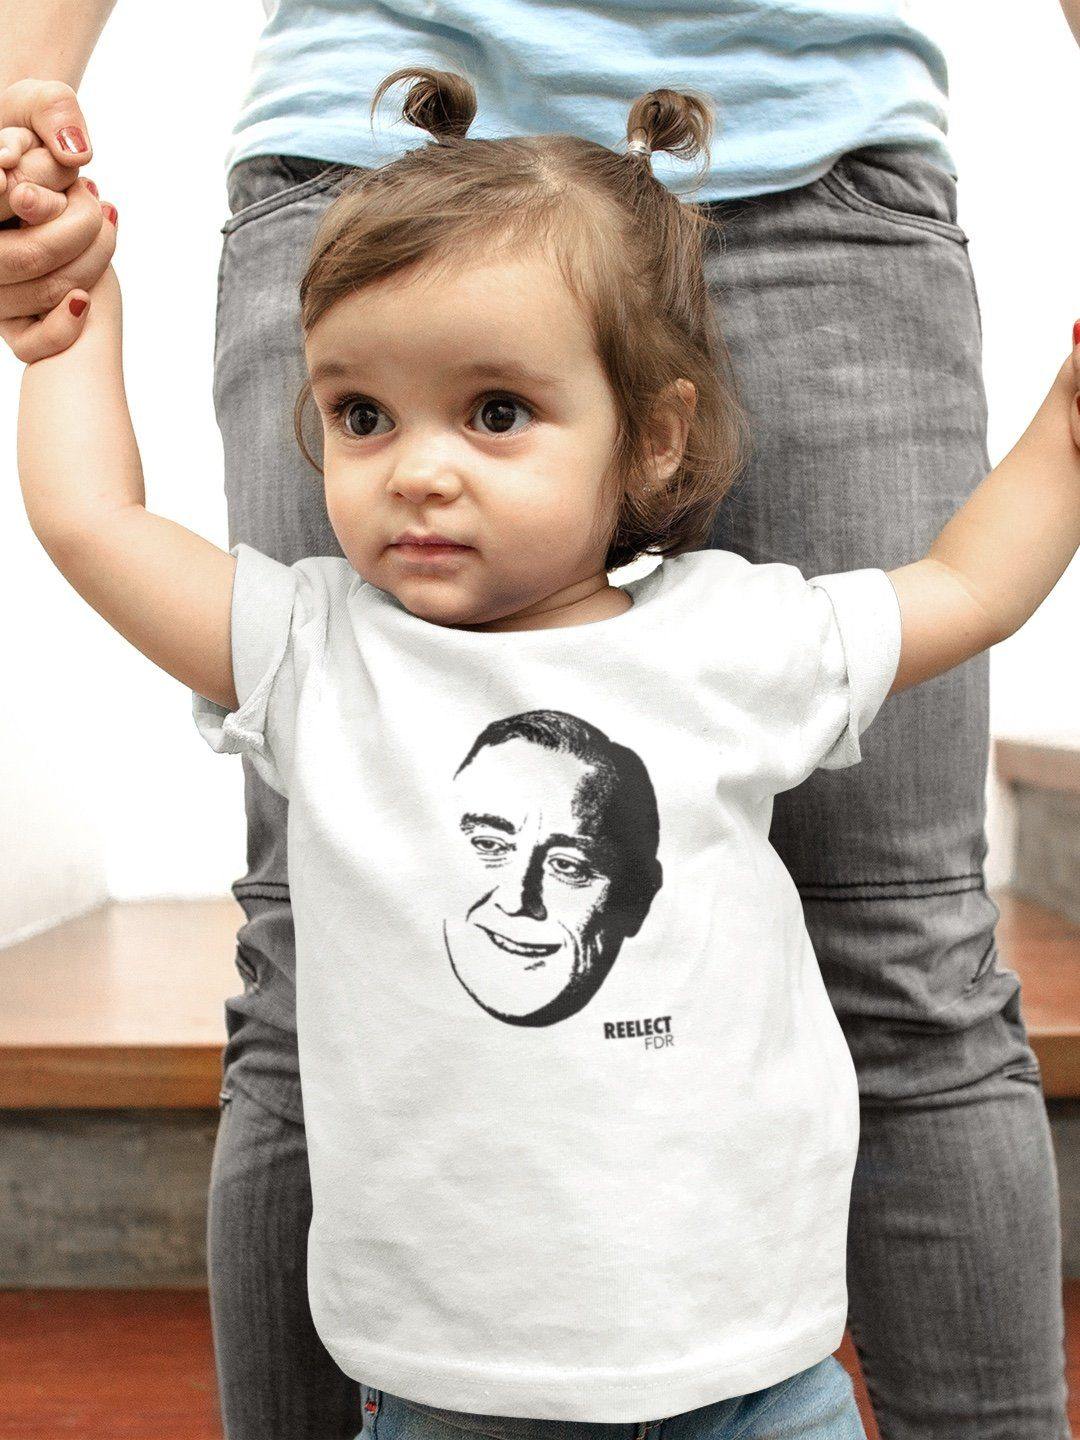 A New Deal Baby Tee Baby Shirt Reelect FDR 